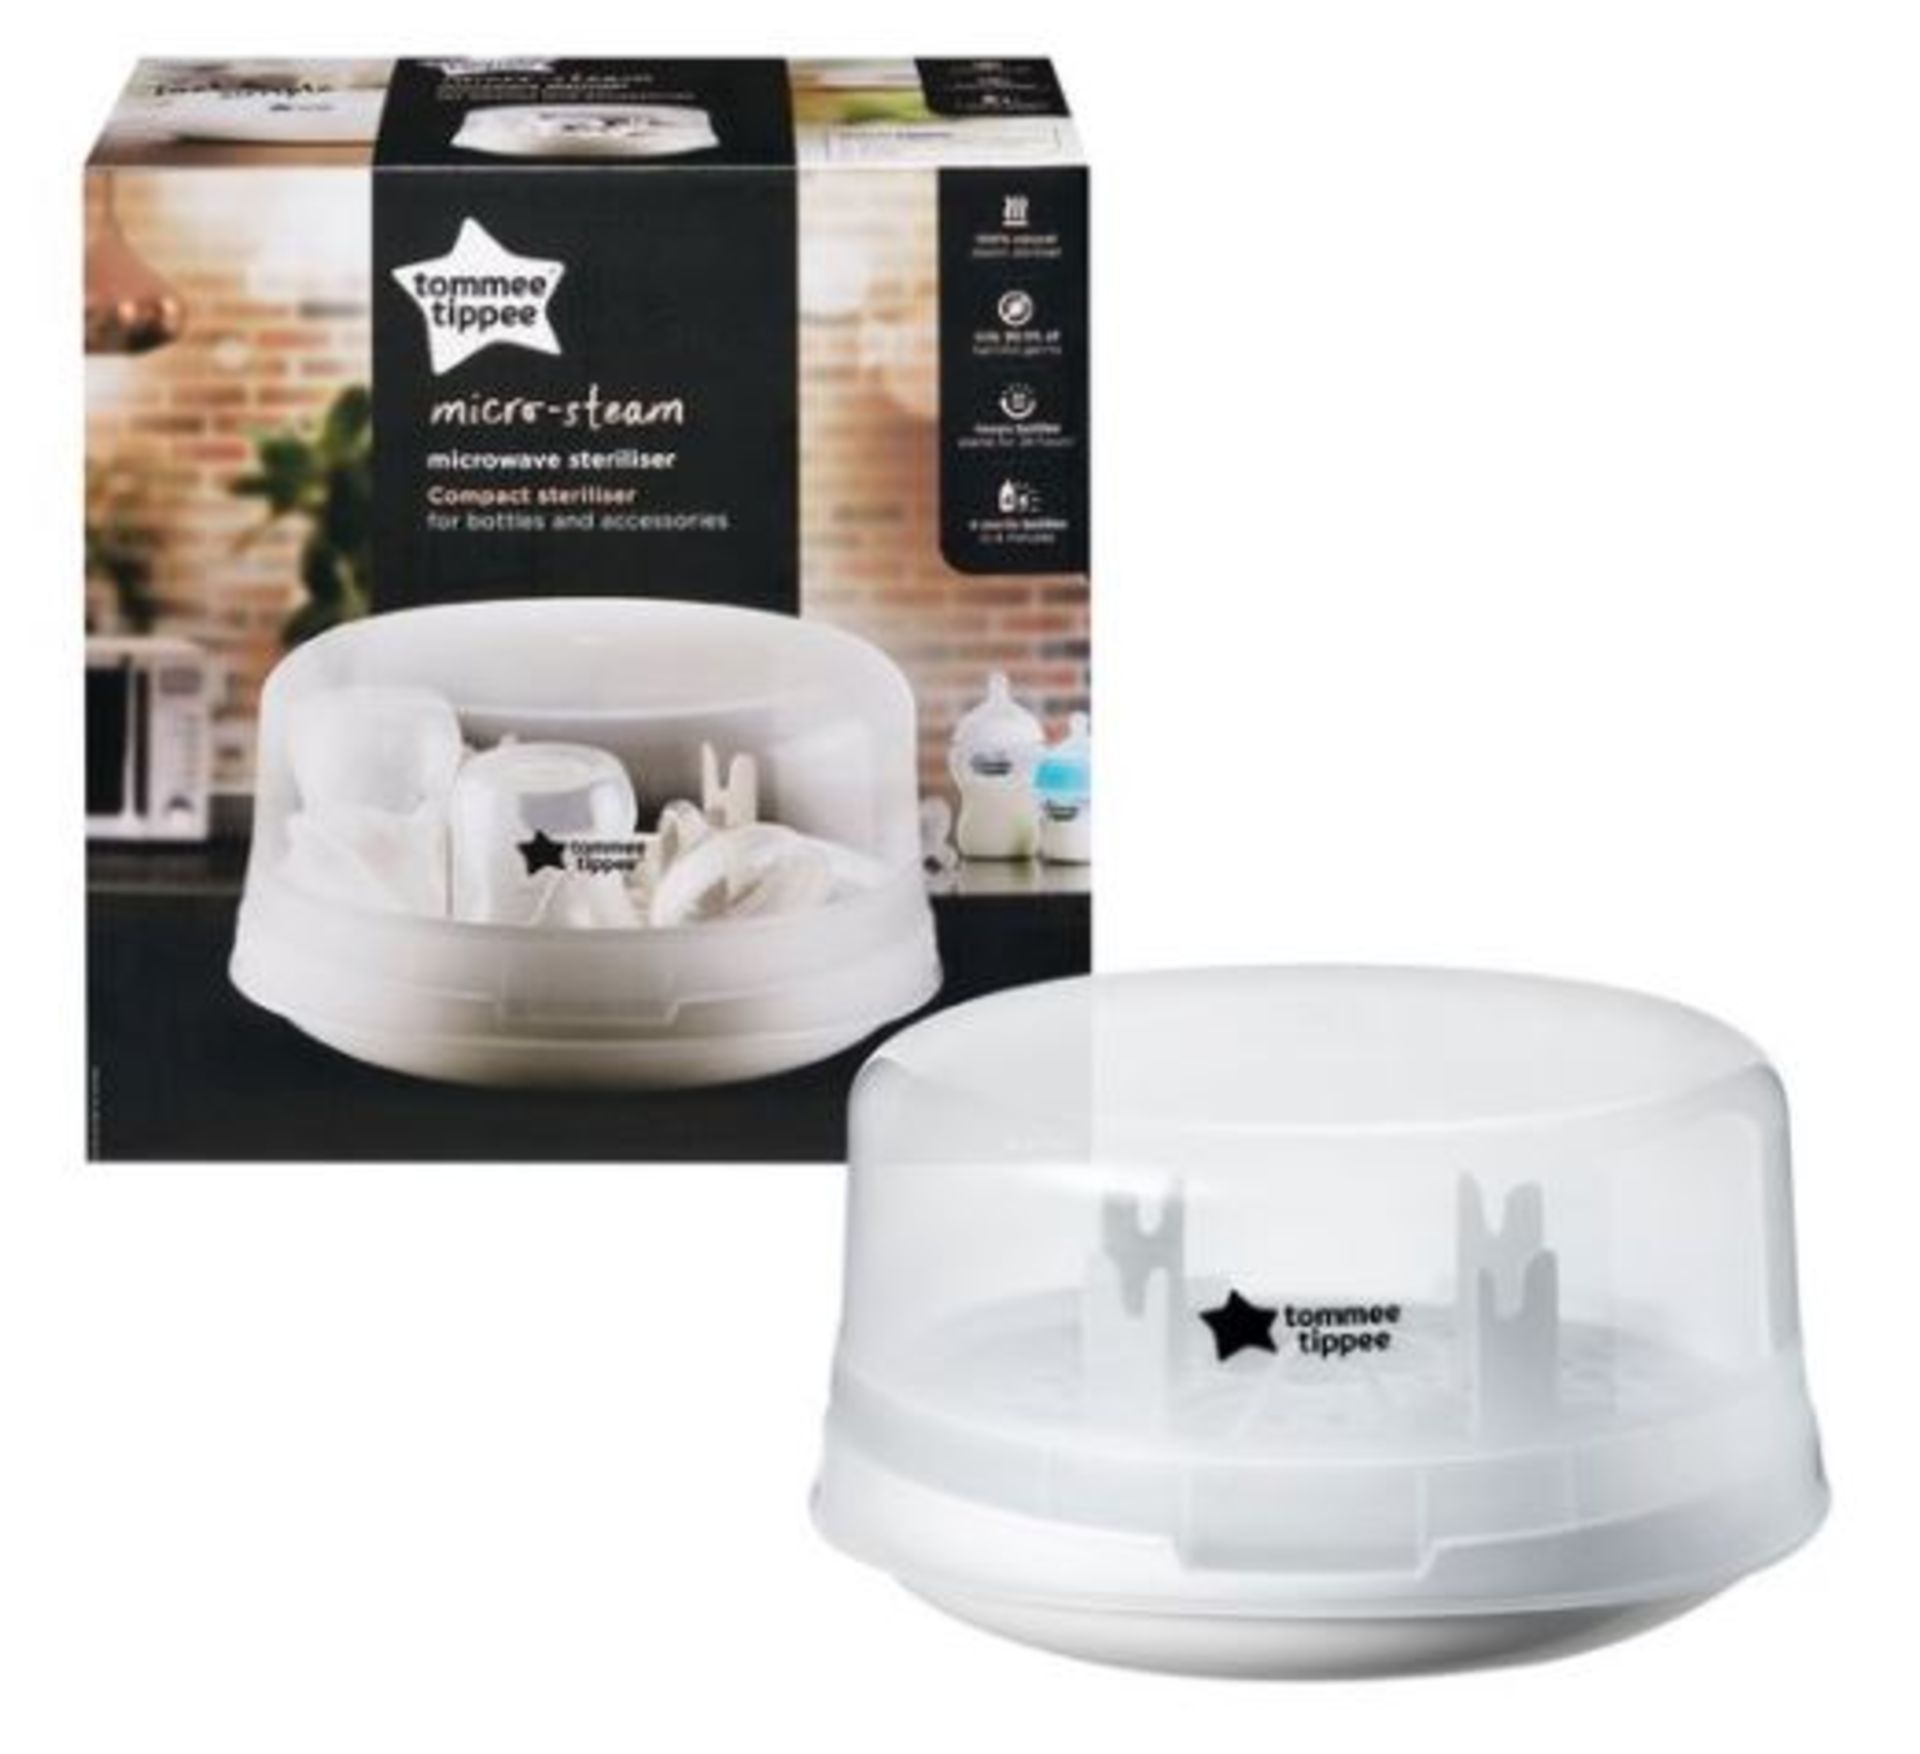 Tommee Tippee Micro Steam Microwave Steriliser. New, Sealed Product. No Guarantee Or Warranty I...